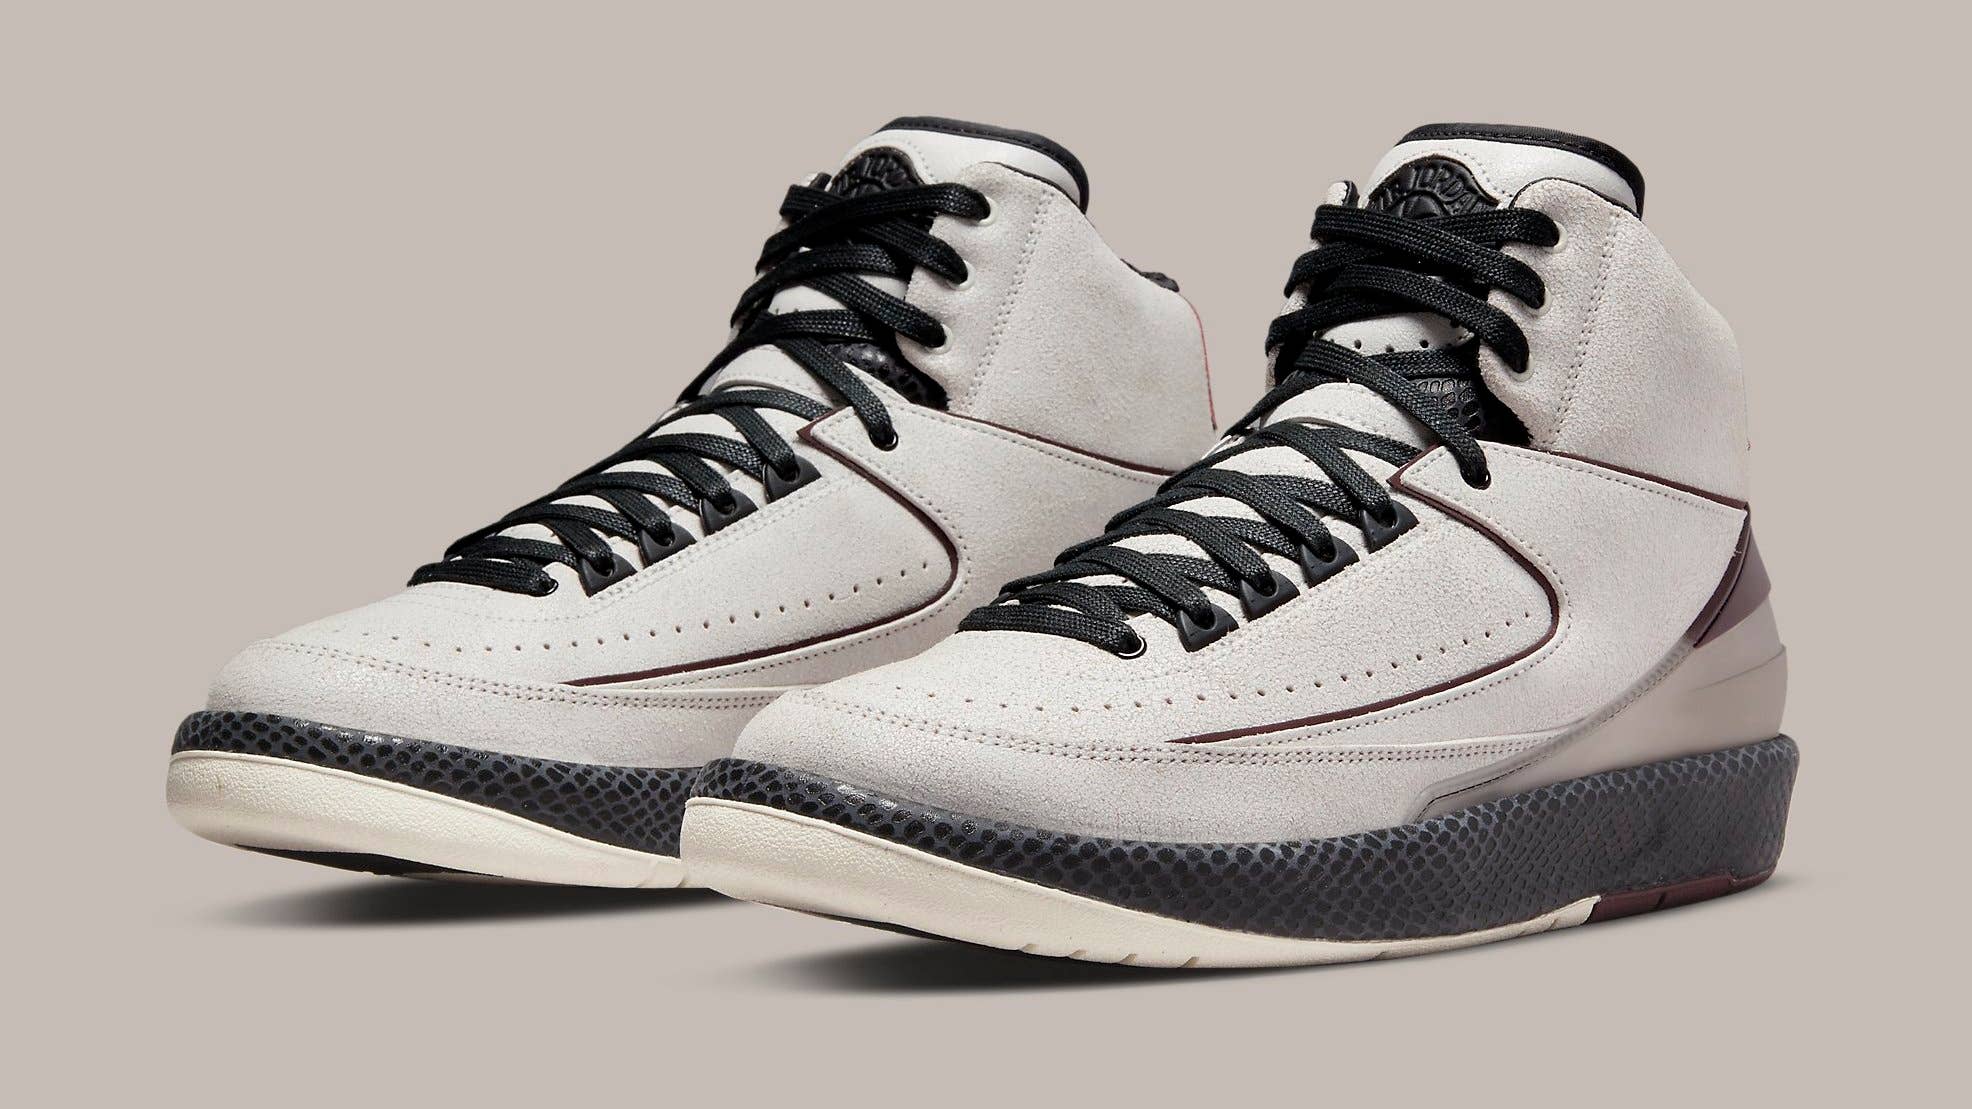 x Air Jordan 2 Collab Is Reportedly Releasing in 2022